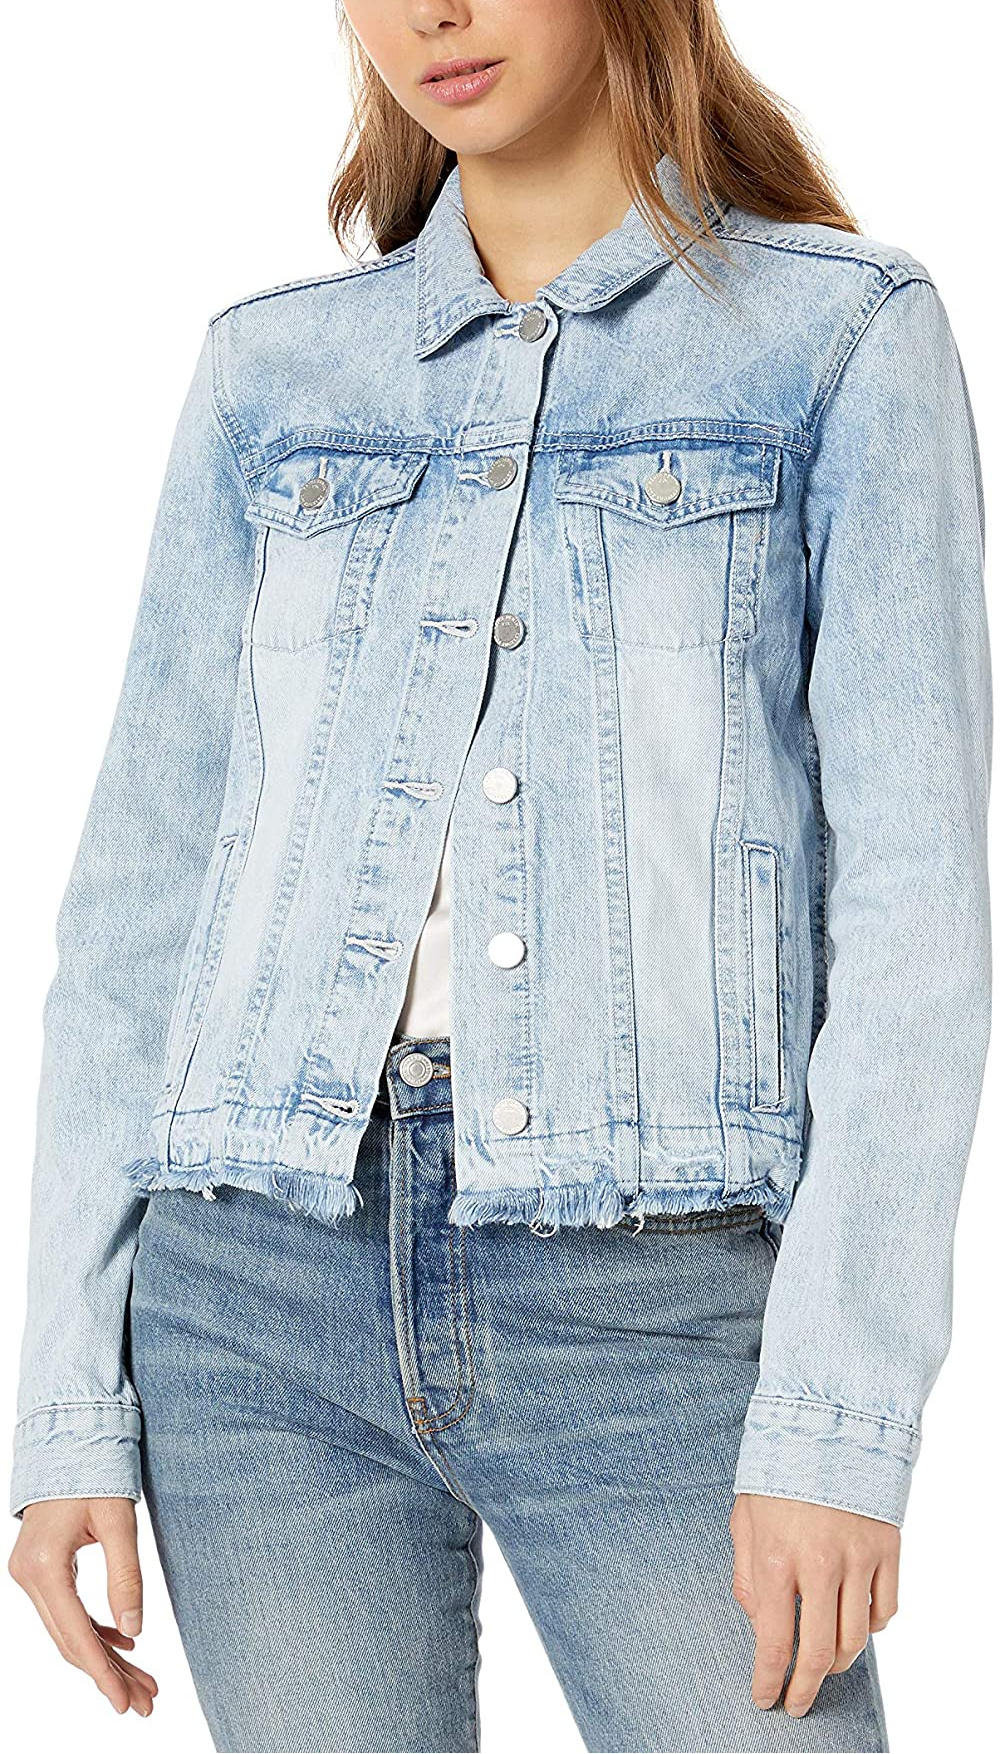 Buy > light blue jeans jacket for womens > in stock